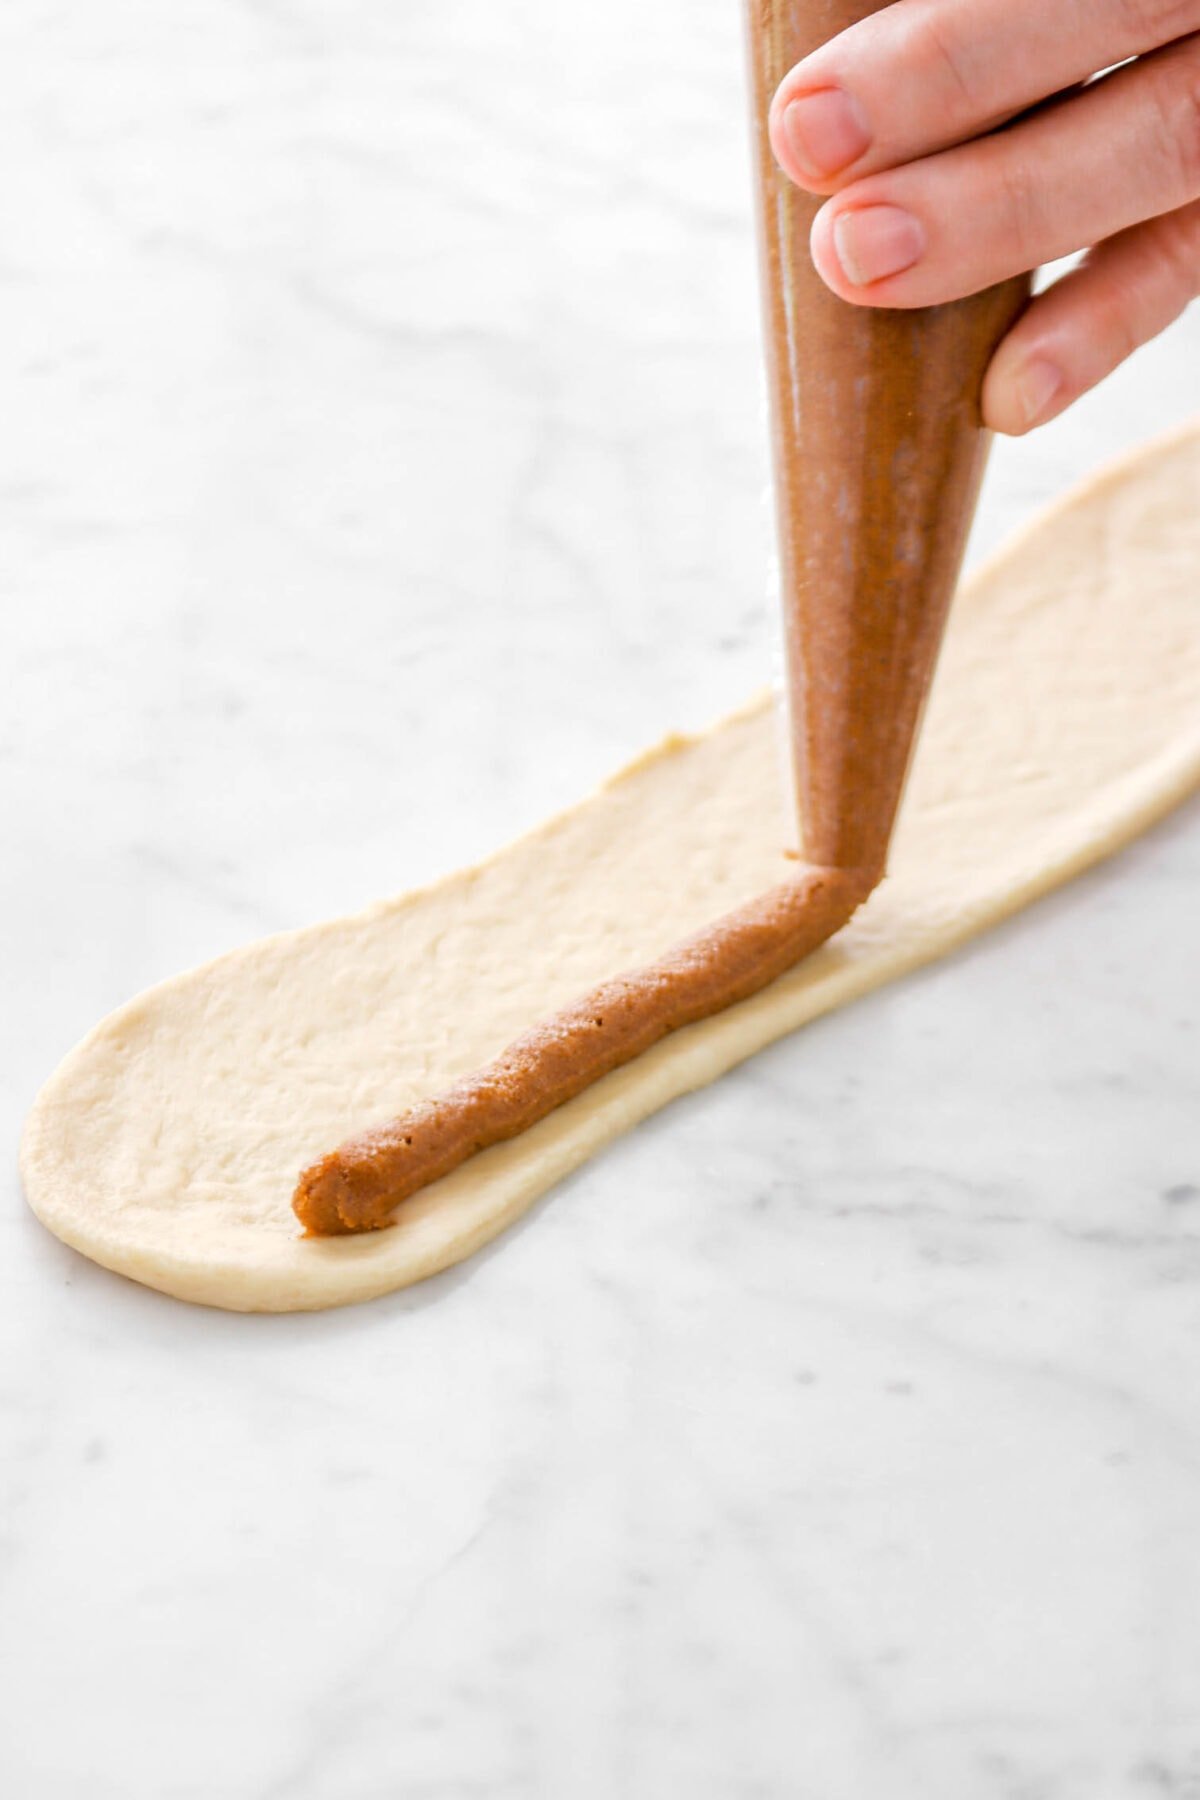 cinnamon sugar schmear being piped onto rolled out dough